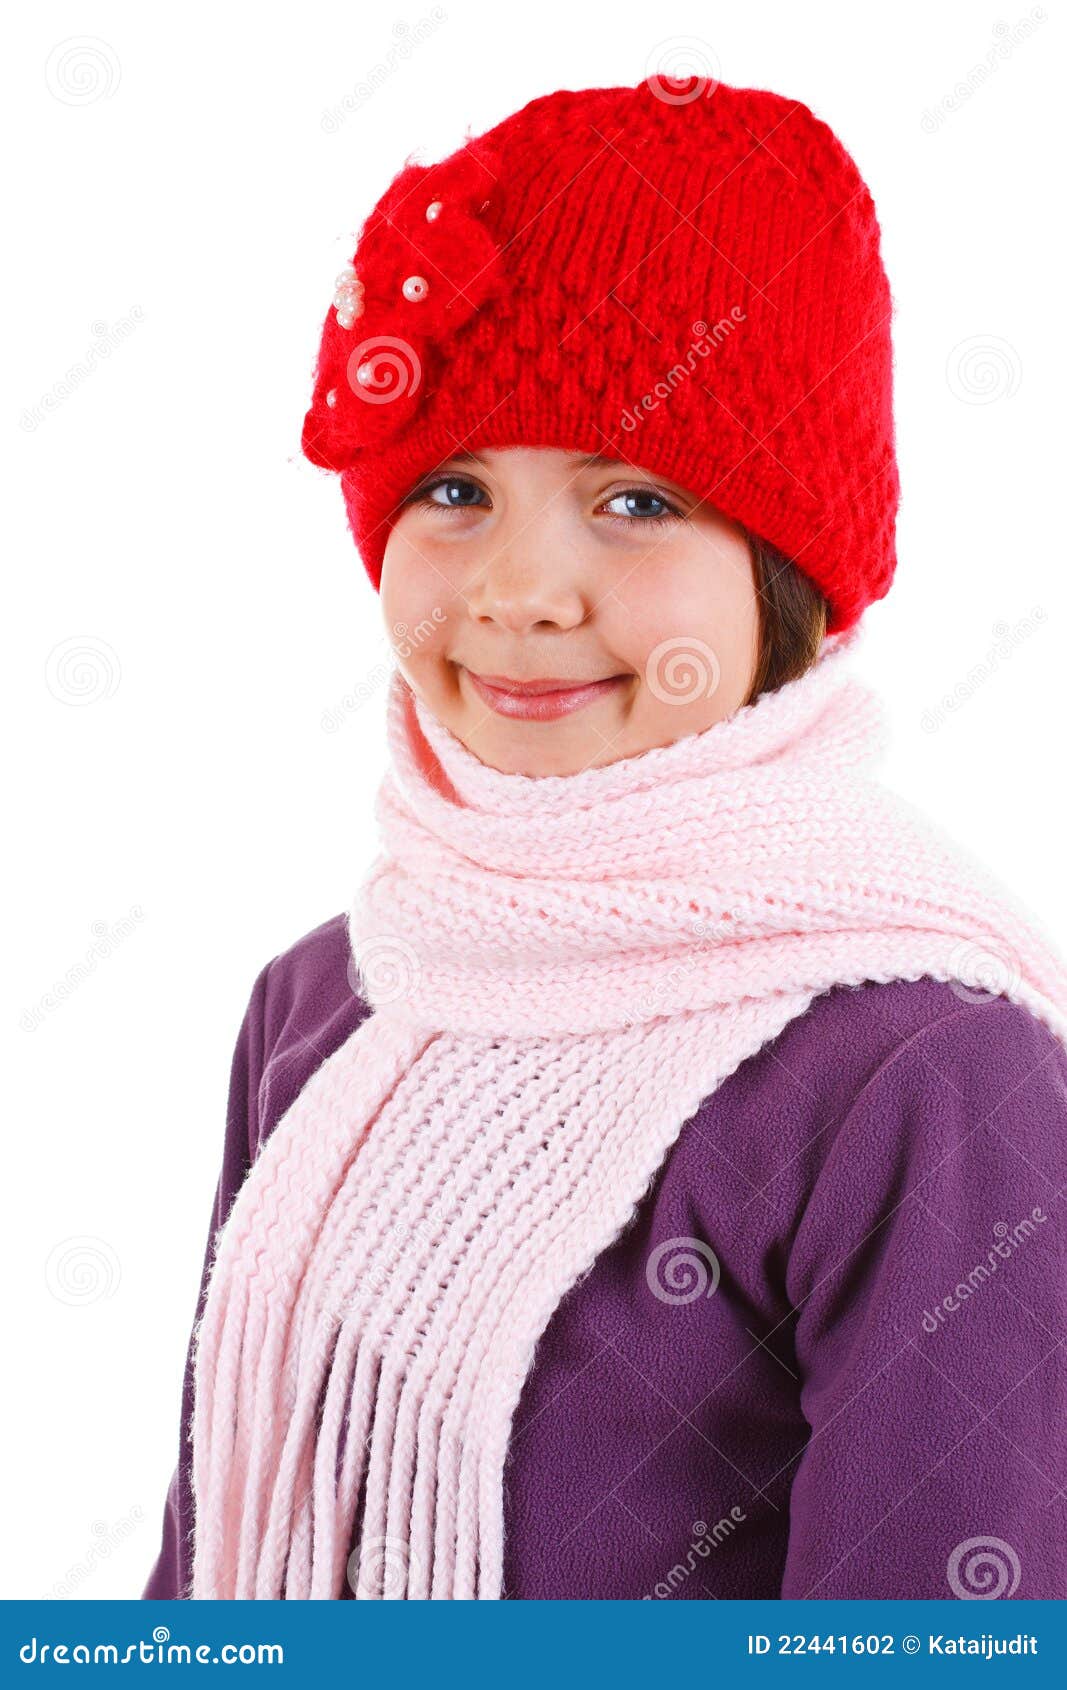 Beautiful Little Girl in Winter Outfit Stock Photo - Image of colorful ...